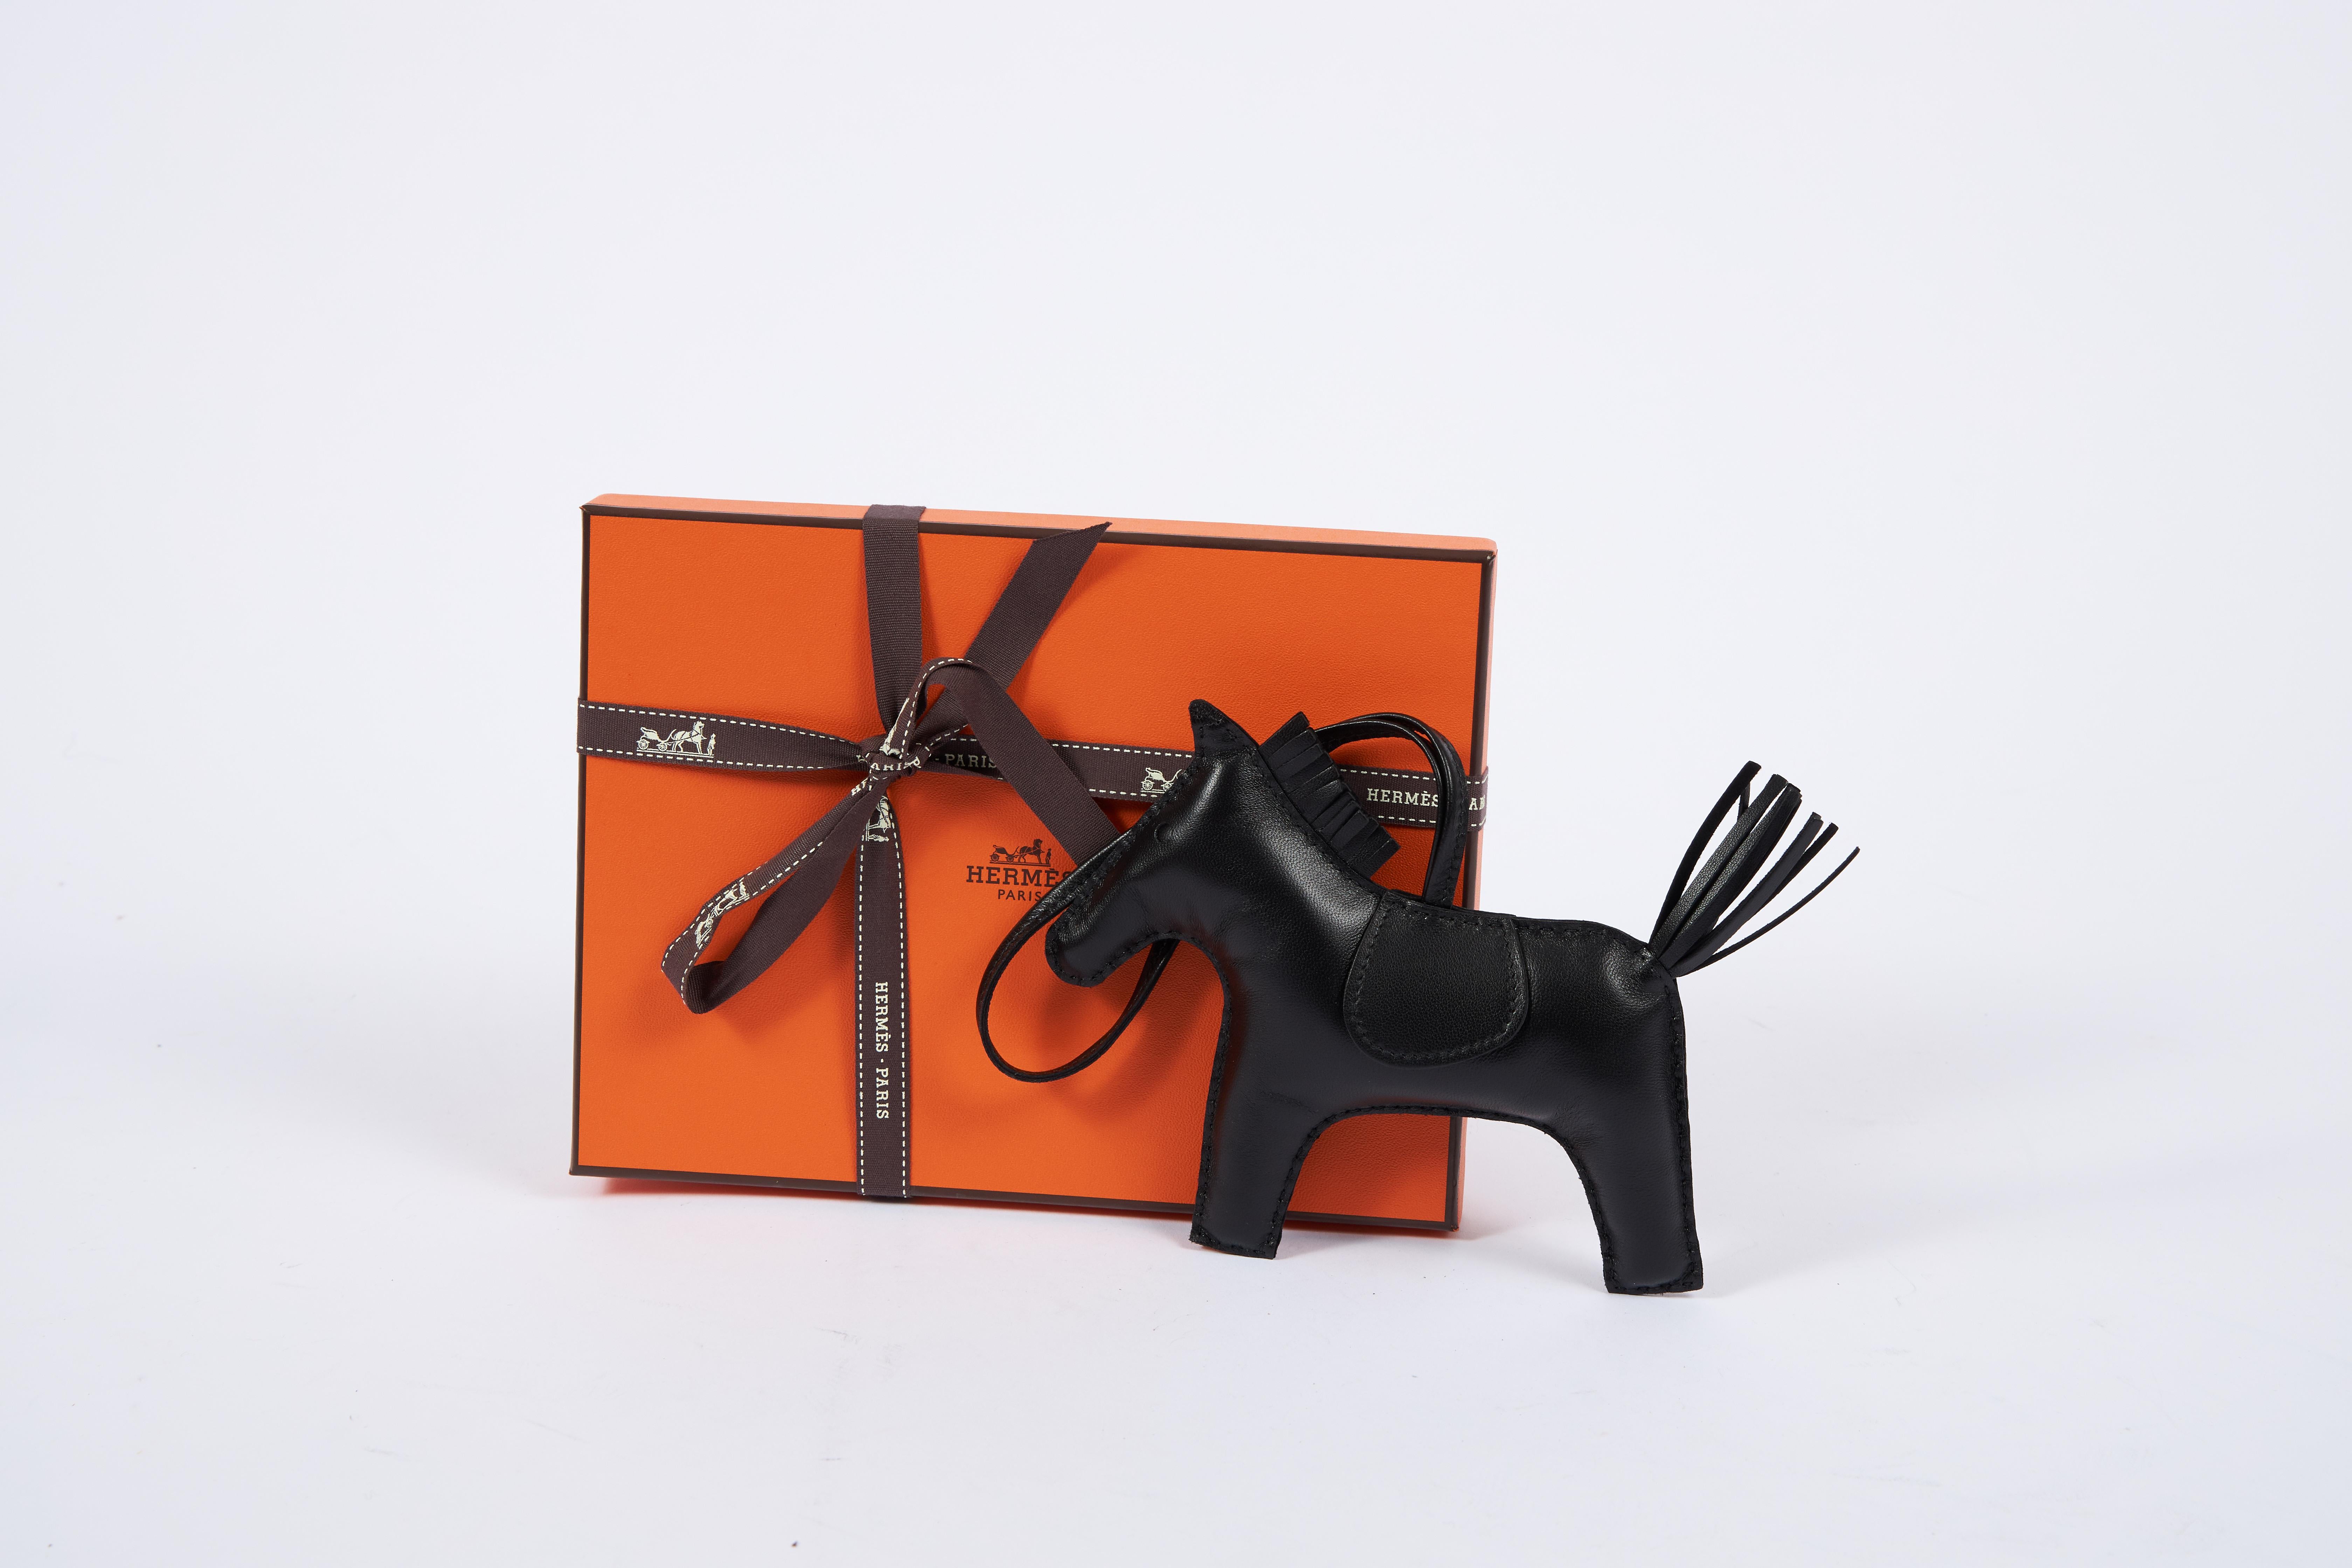 Hermes rare and collectible brand new in box large grigri roder all black swift leather charm. Comes with original box, ribbon and shopping bag.
